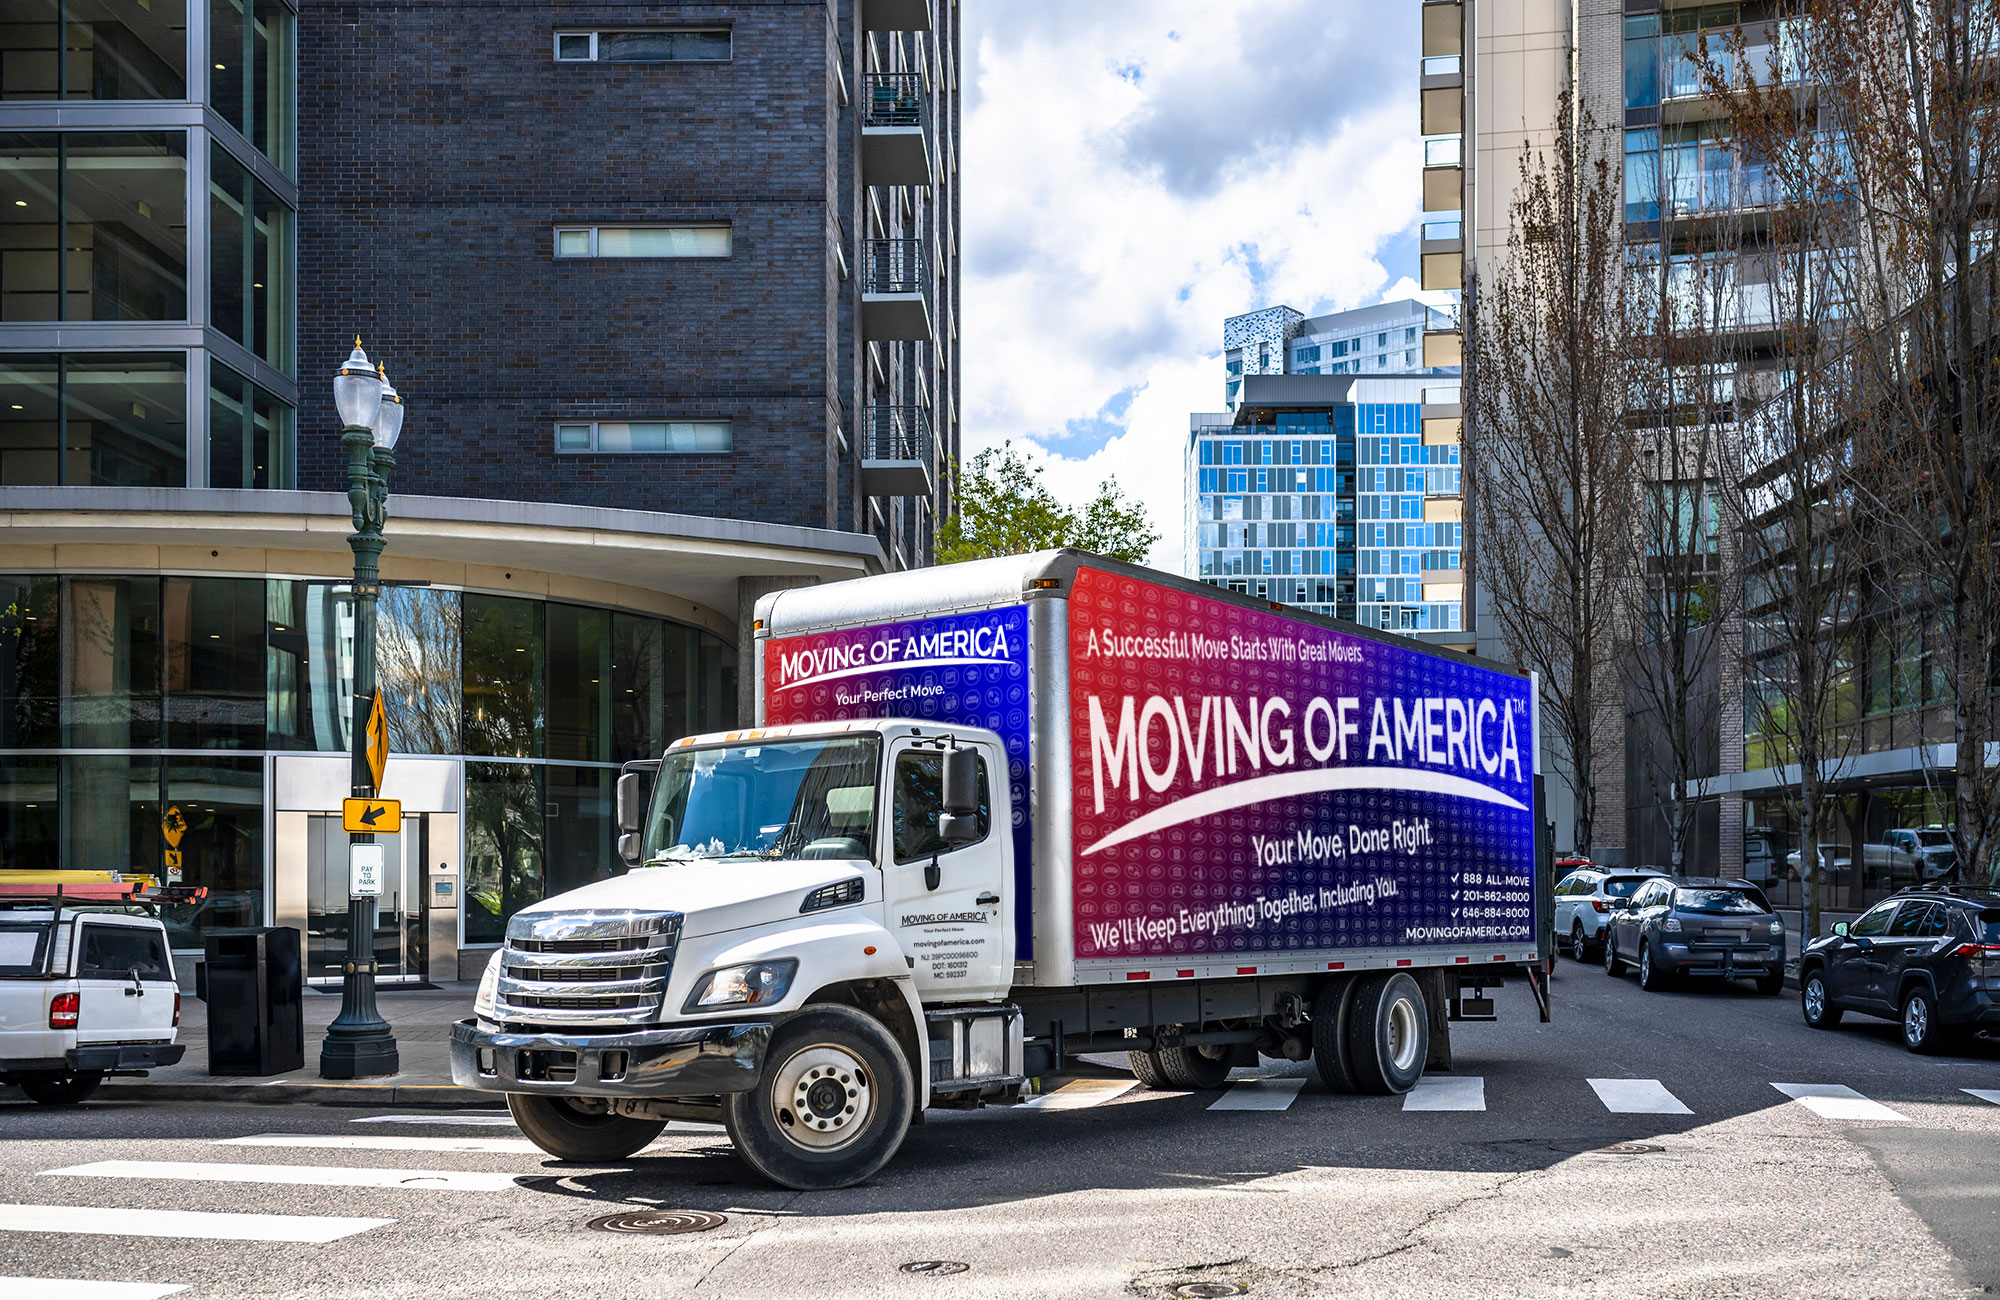 Expert Furniture Moving Services in North Bergen, NJ, for Residential and Commercial